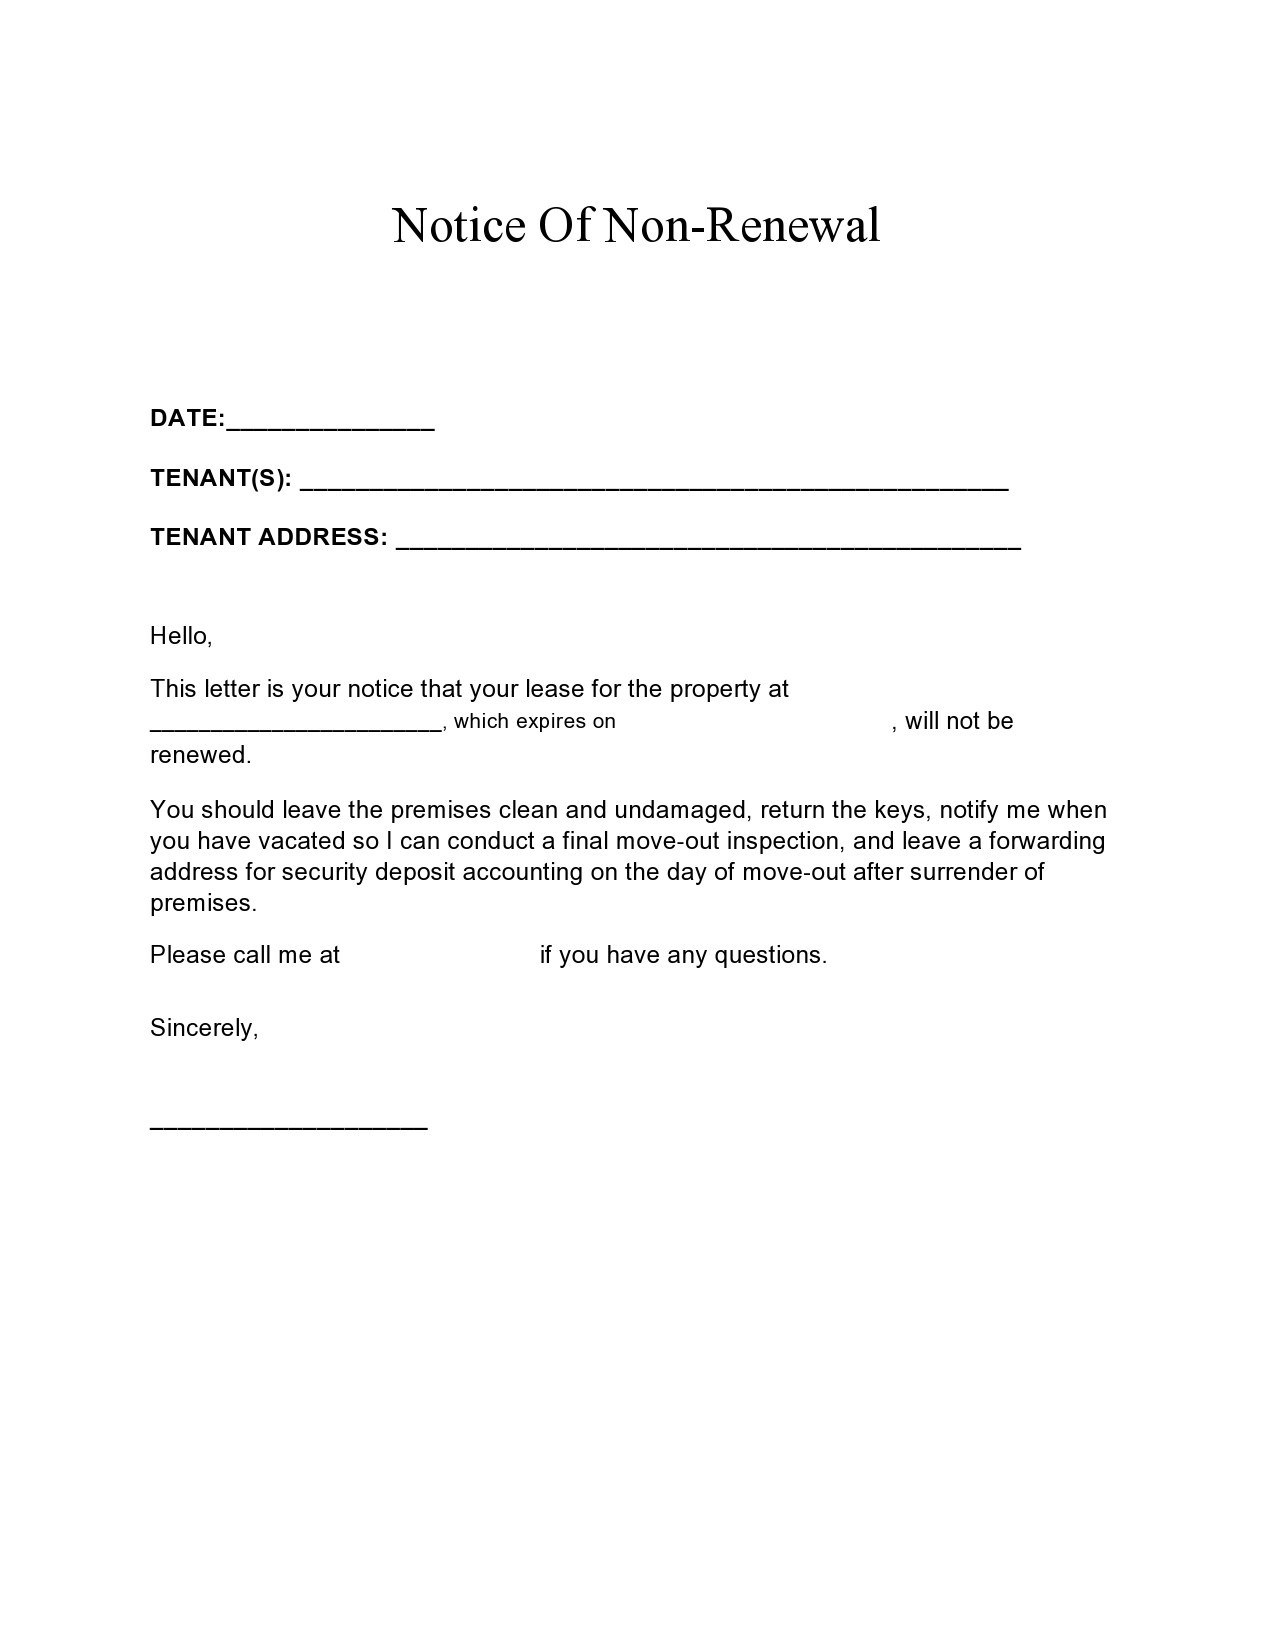 Free not renewing lease letter 27